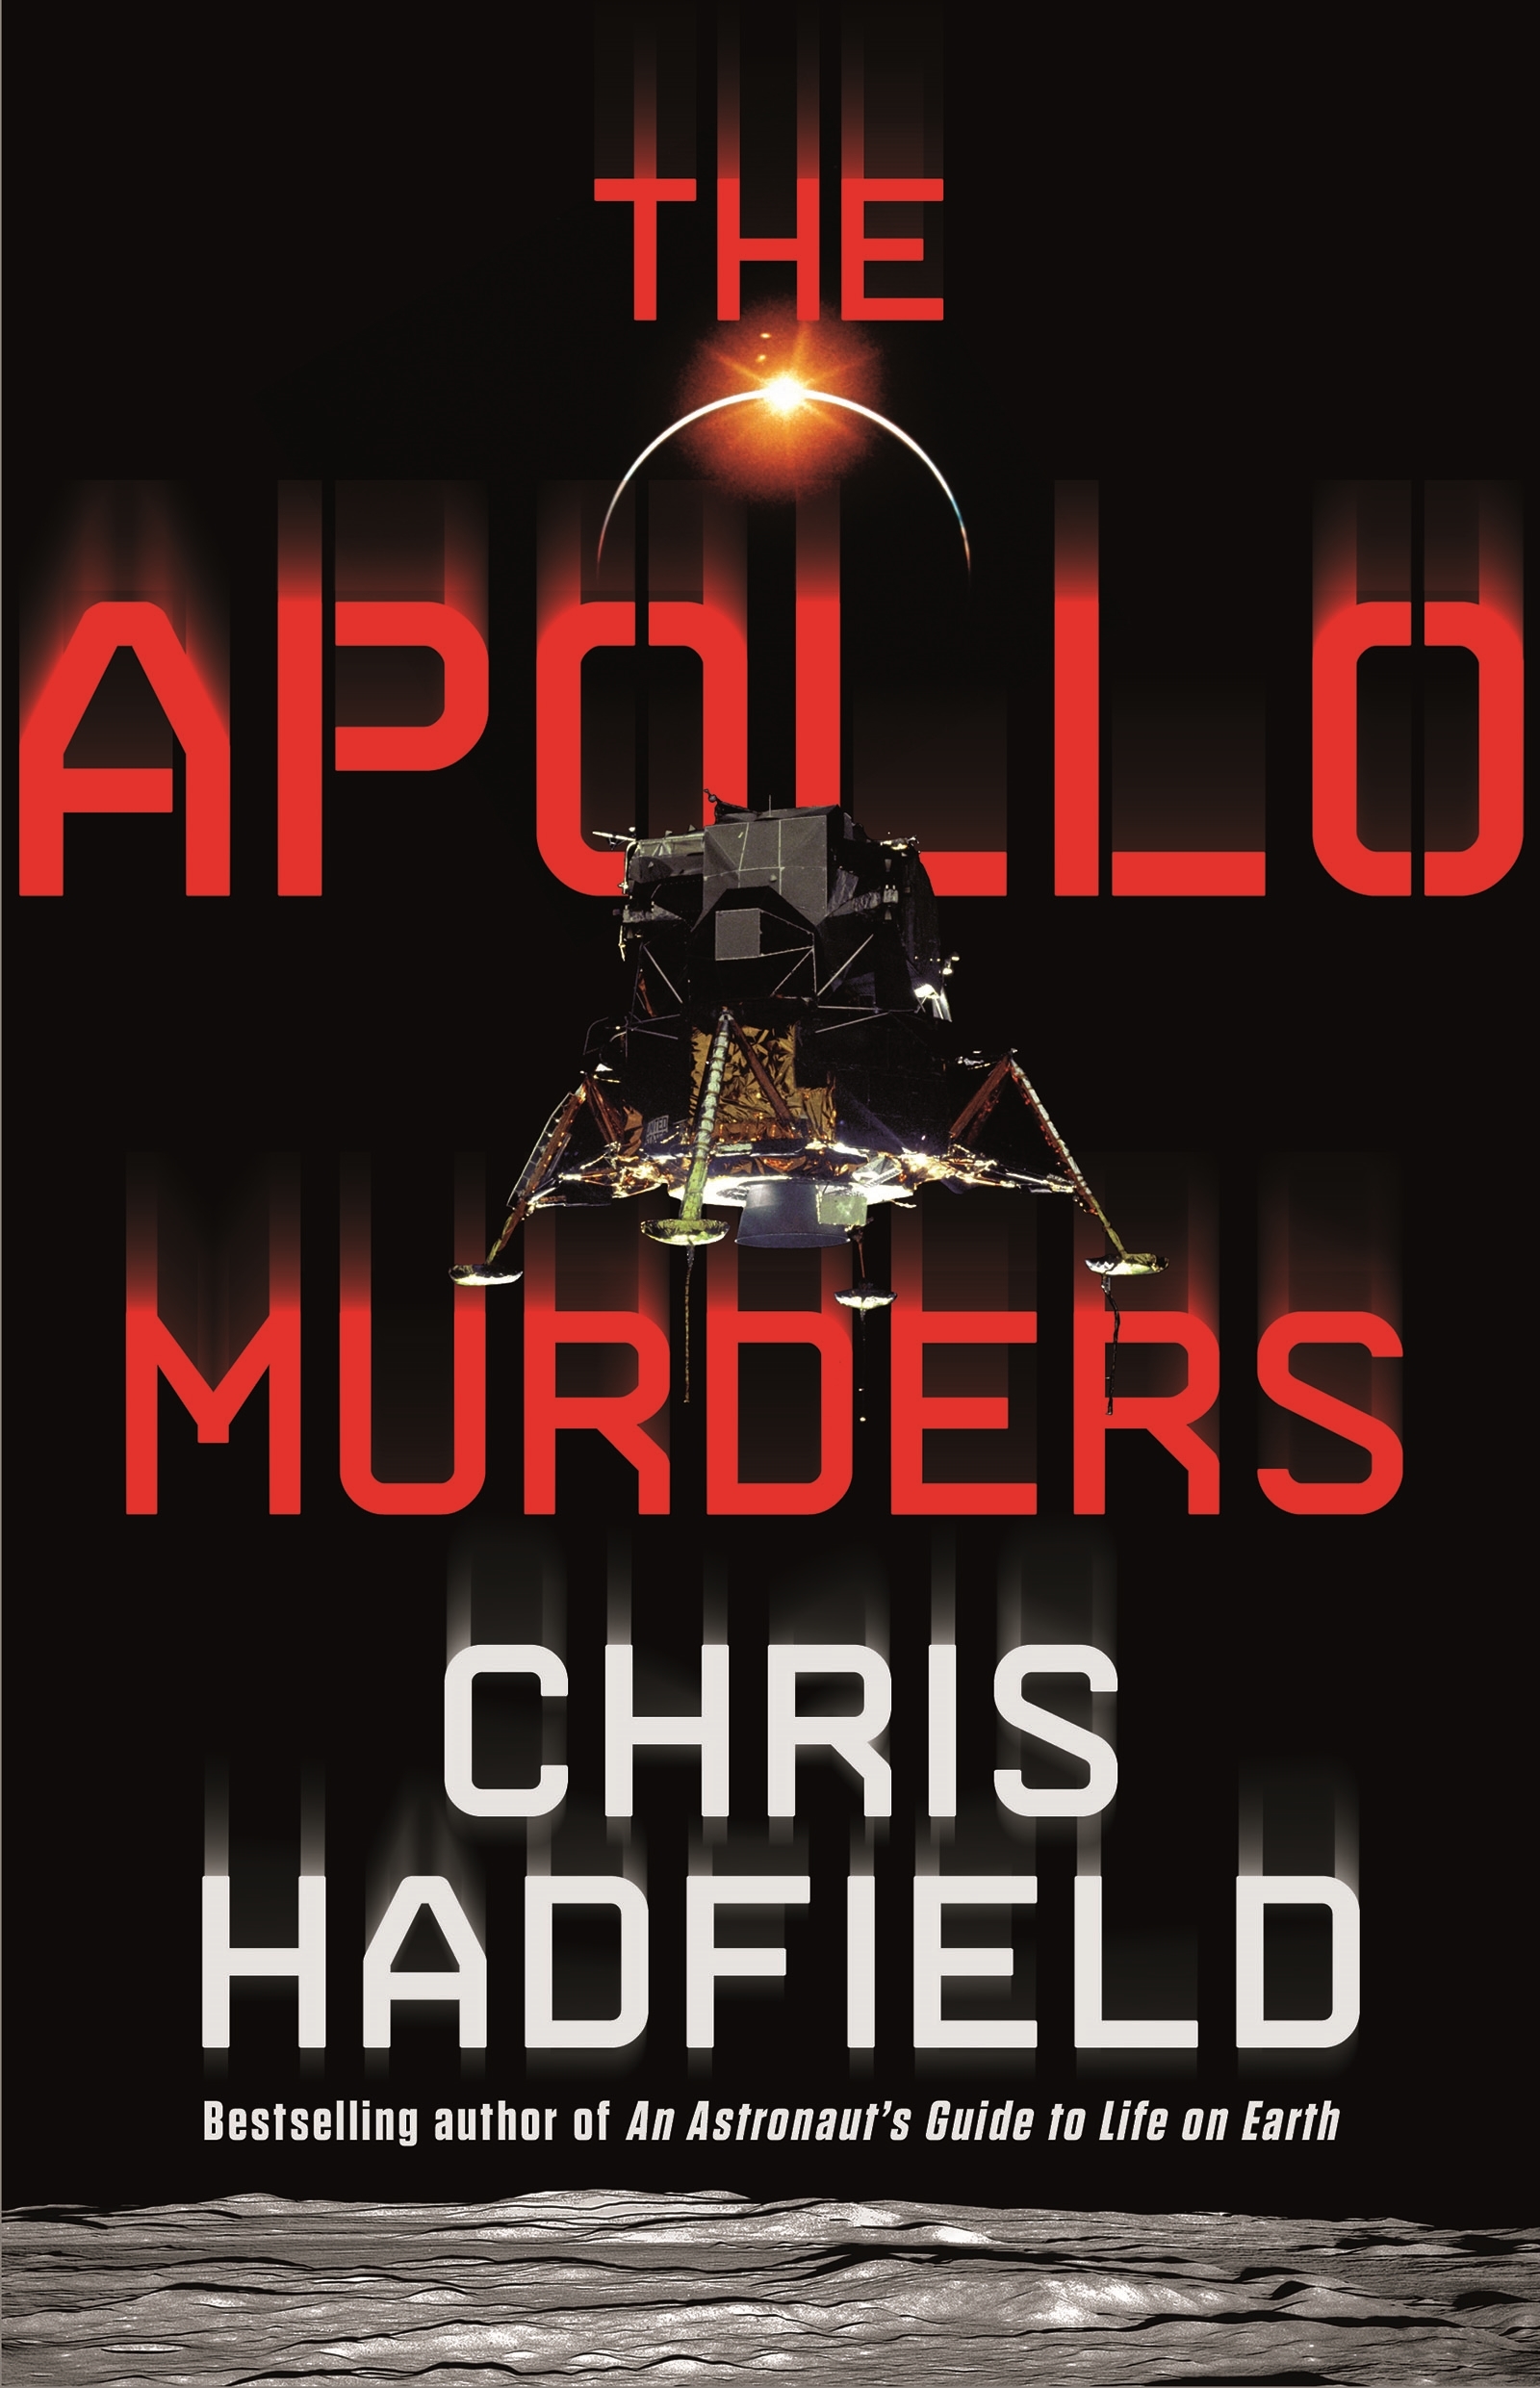 Book cover: The Apollo Murders by Chris Hadfield - Bestselling author of An Atsronaut's Guide to Life on earth - UK Version